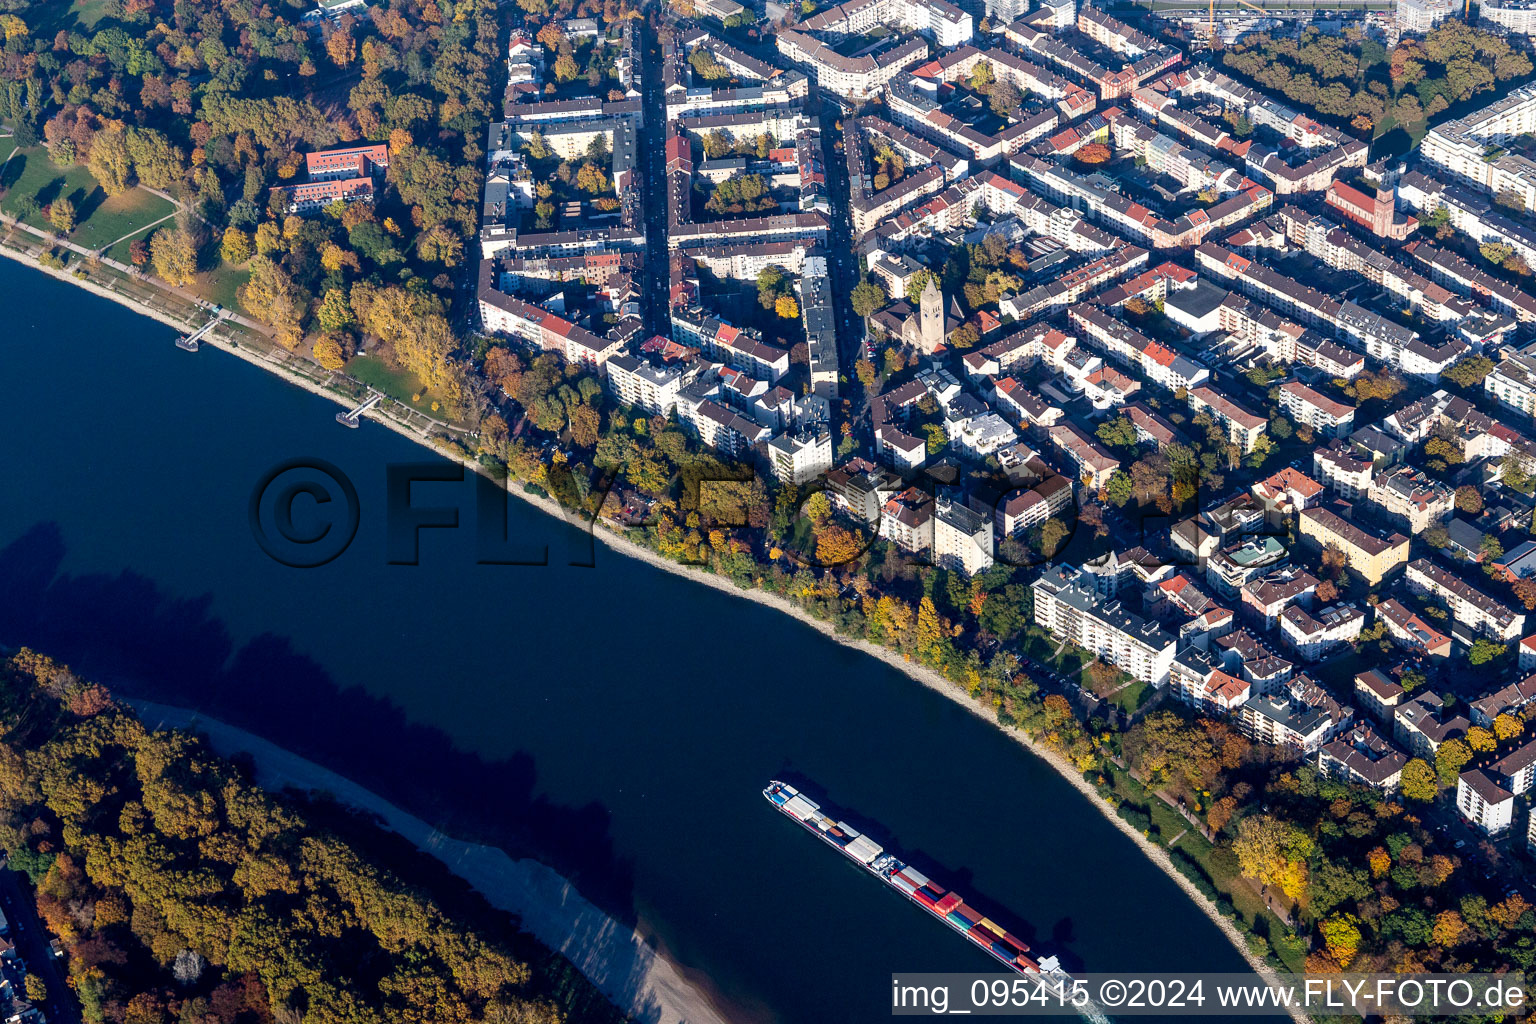 Aerial view of Town on the banks of the river of the Rhine river in the district Lindenhof in Mannheim in the state Baden-Wurttemberg, Germany